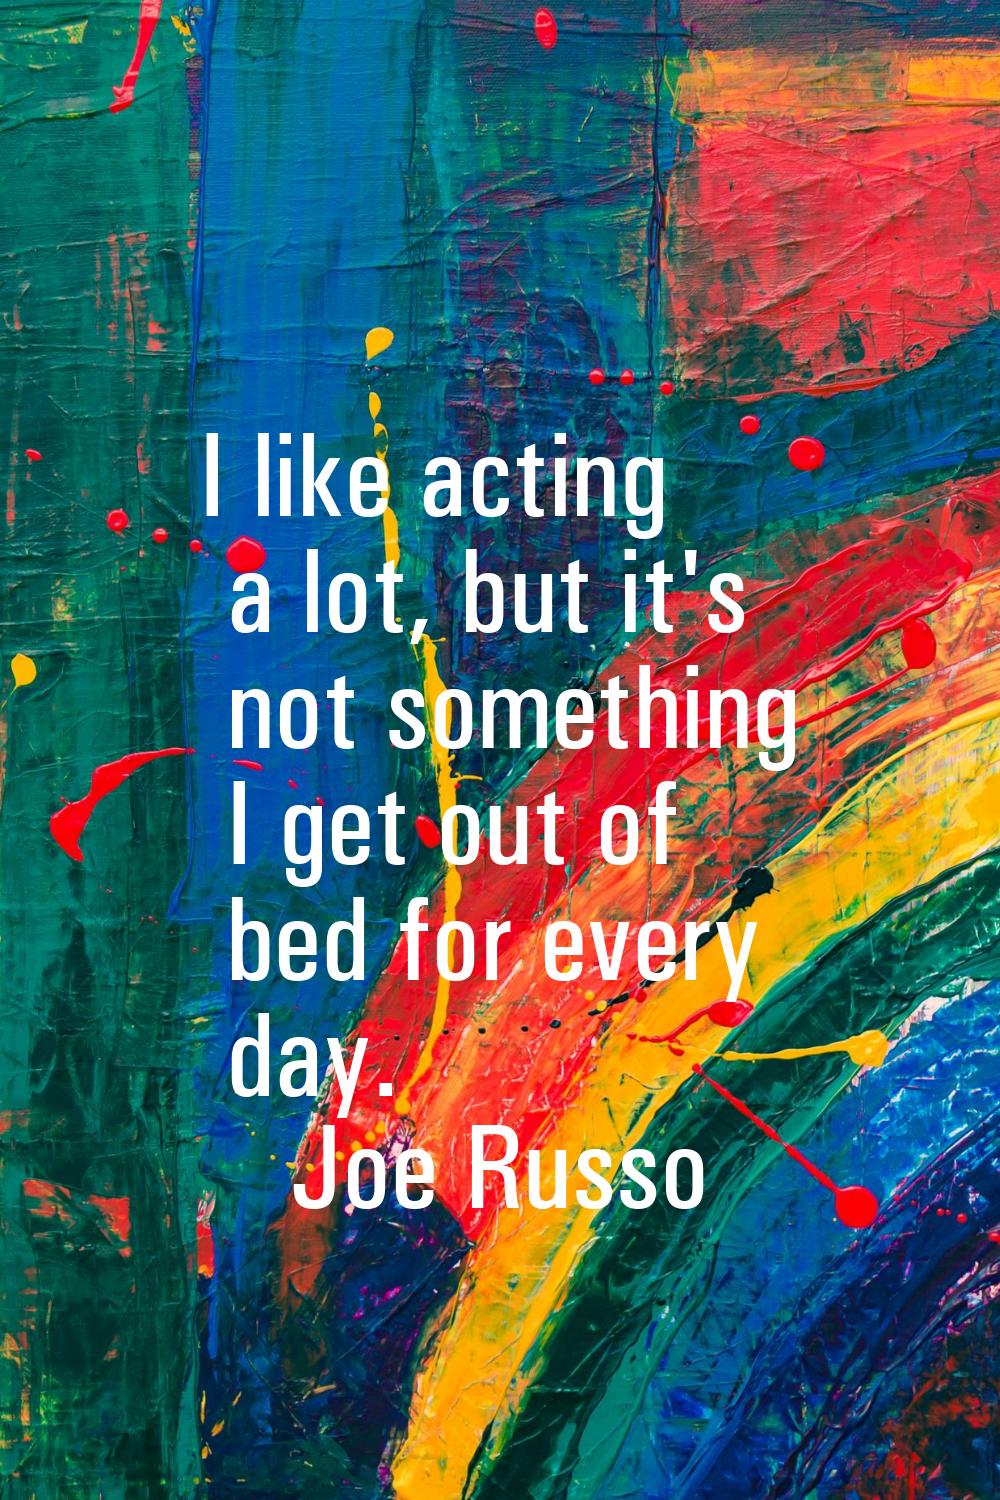 I like acting a lot, but it's not something I get out of bed for every day.